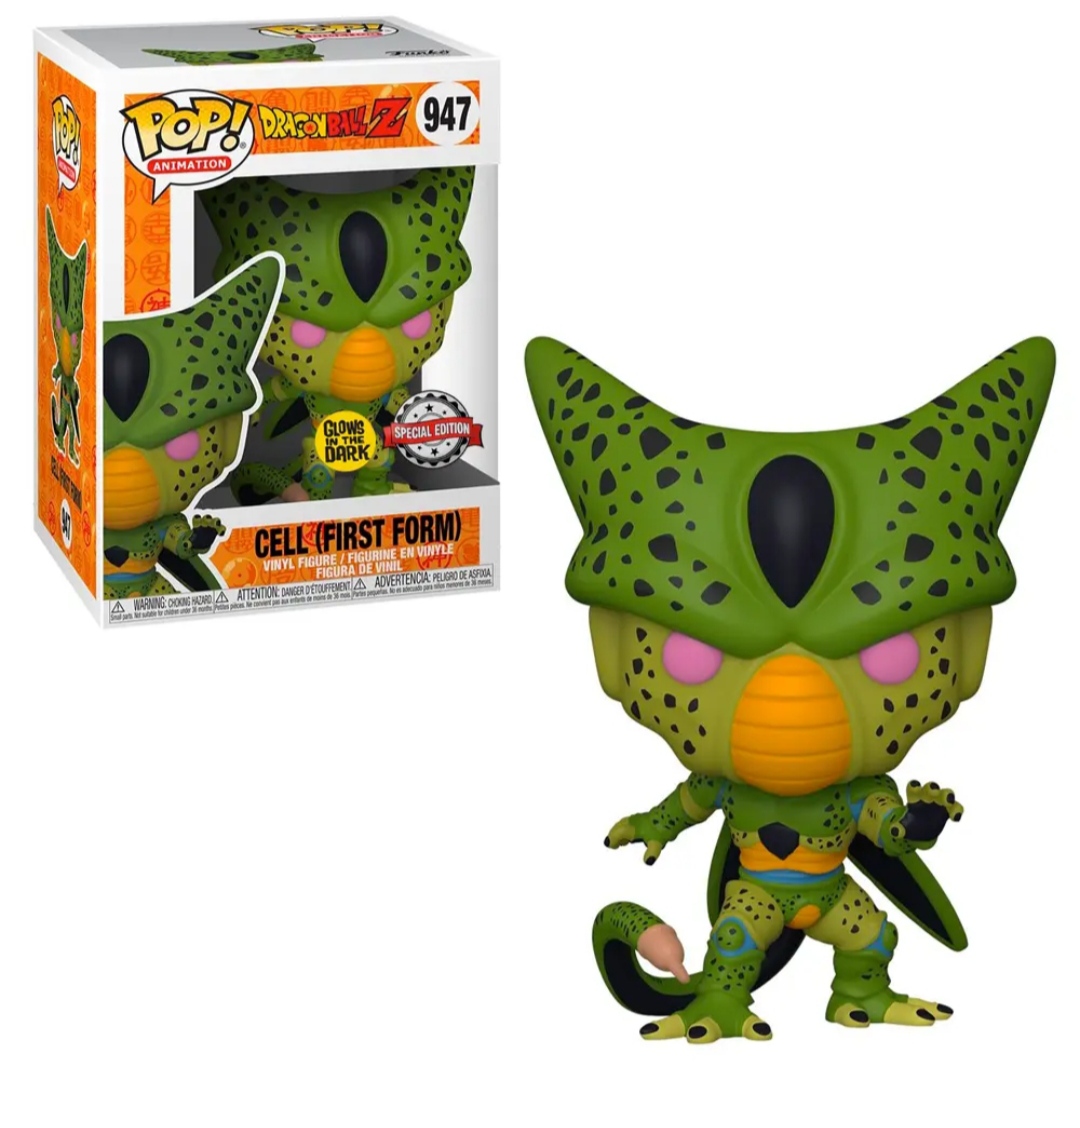 Funko pop Animation: Dragonball – Cell 947 Glow in the dark